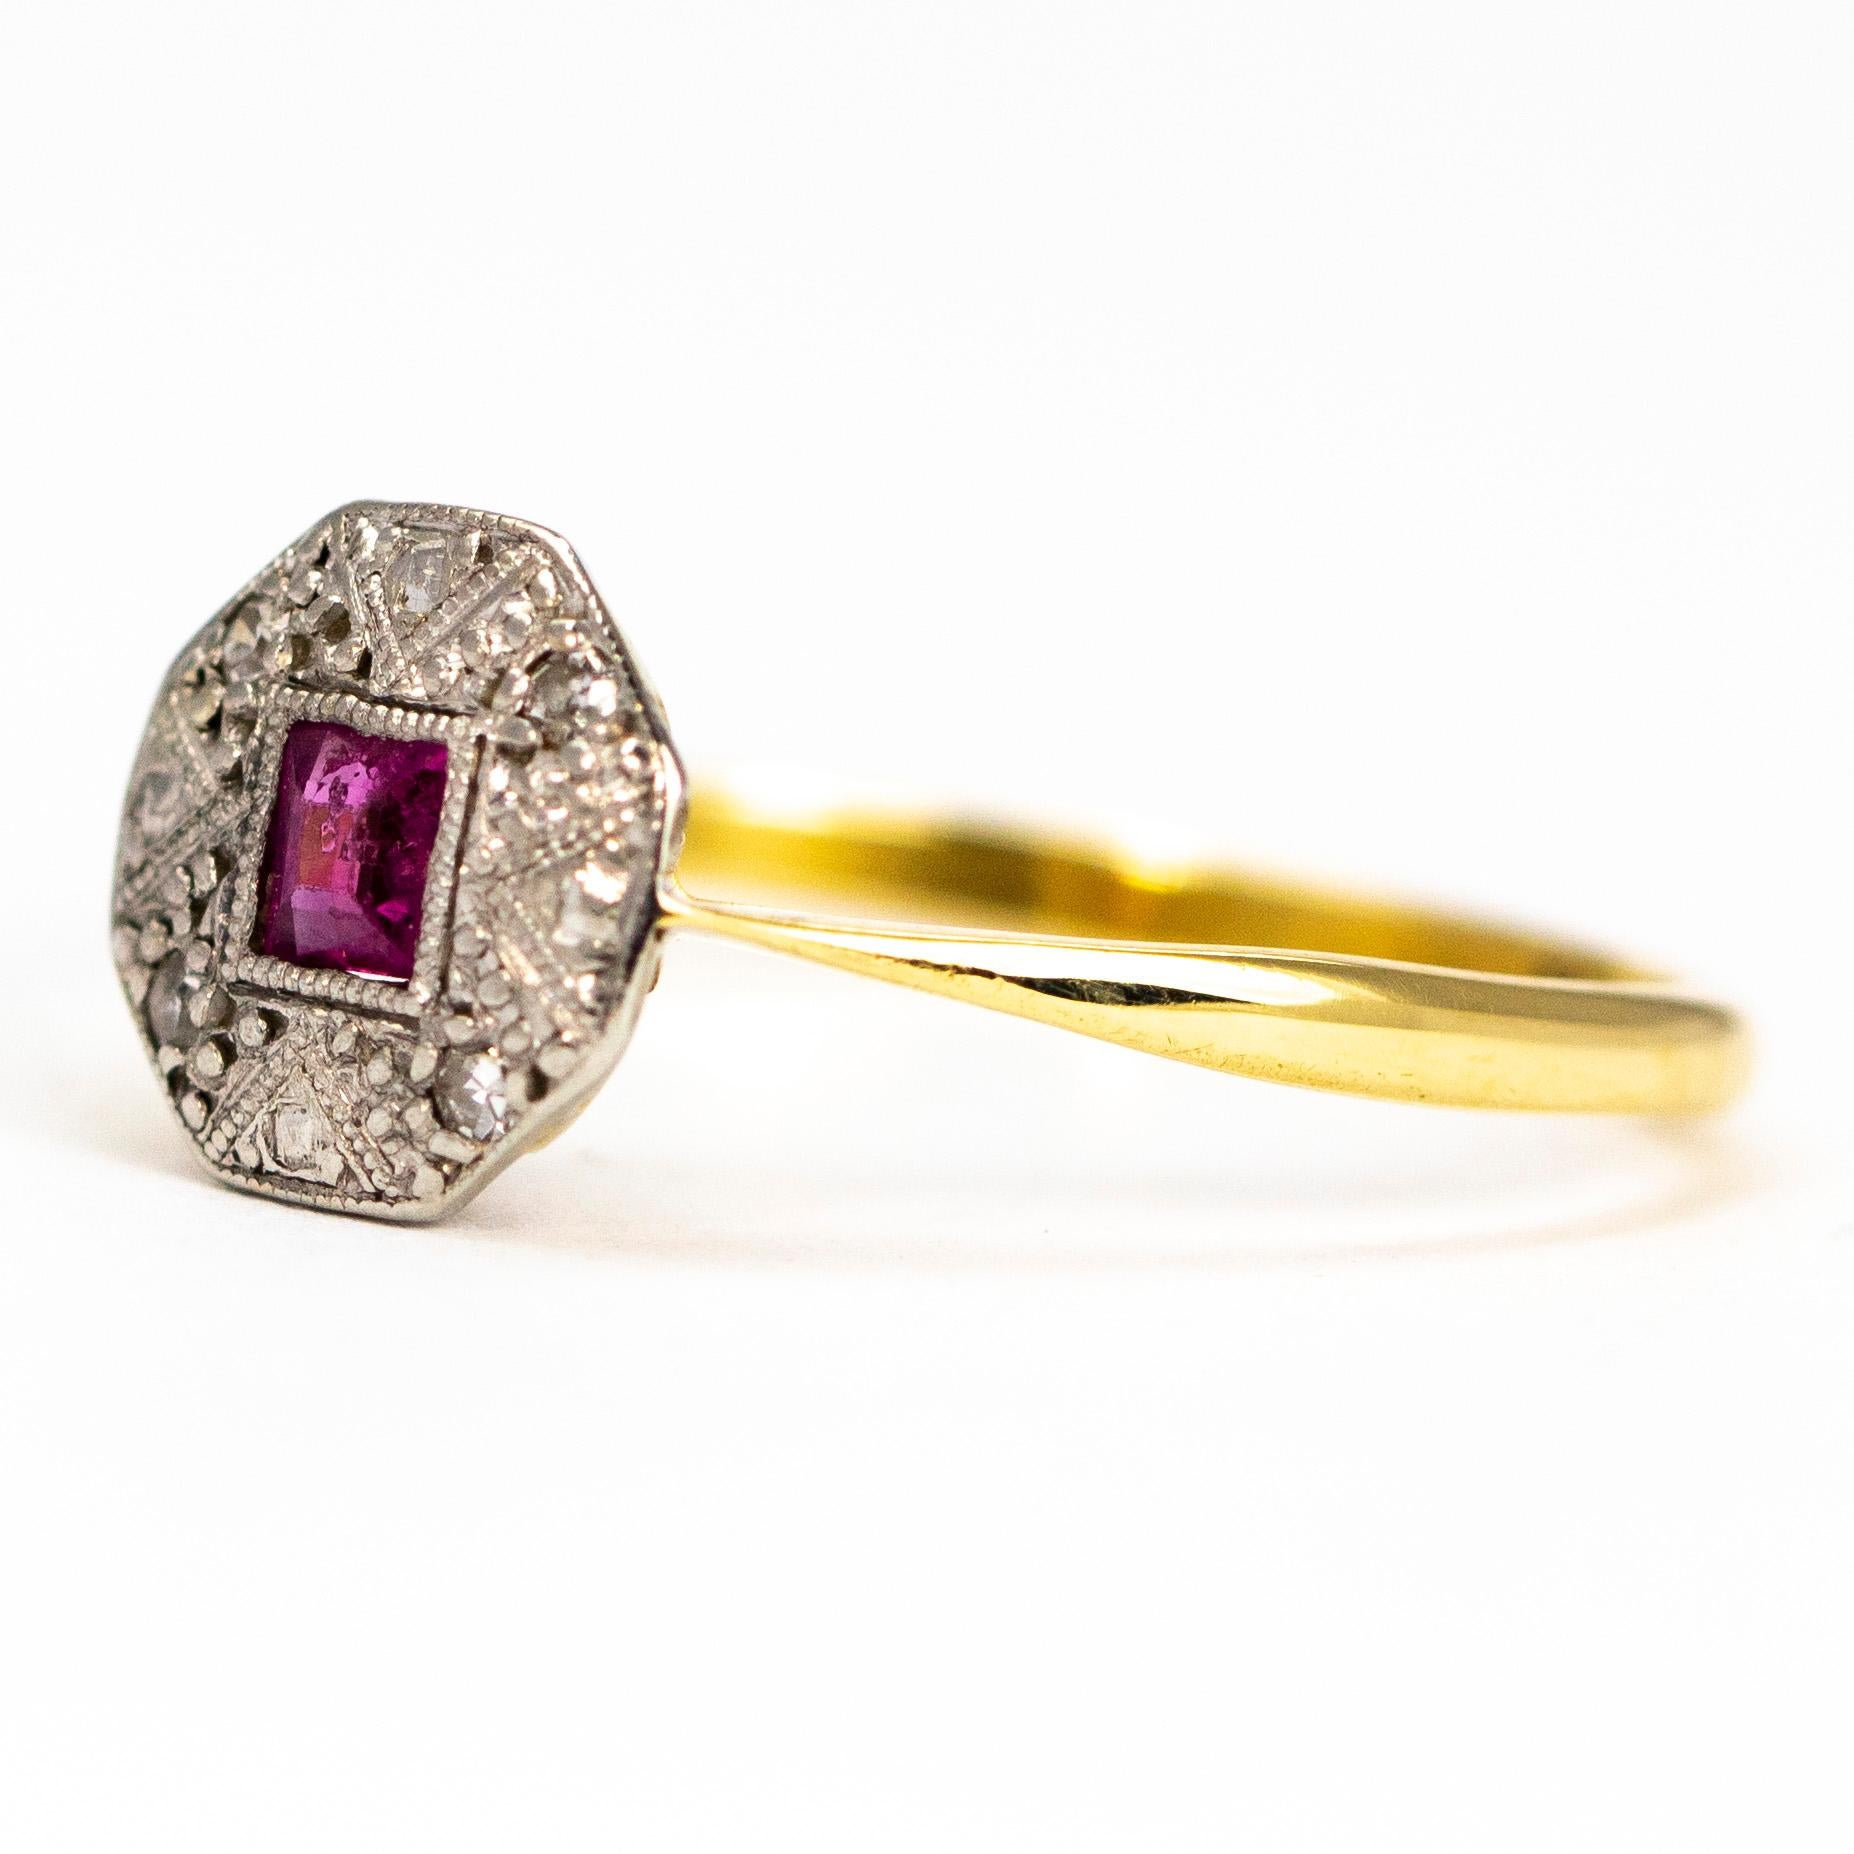 This Art Deco panel ring holds a square cut central ruby measuring 25pts and is surrounded by a highly decorative platinum panel with small diamonds at within it to add that lovely bit of sparkle.

Ring Size: O 1/2 or 7 1/4
Panel Diameter: